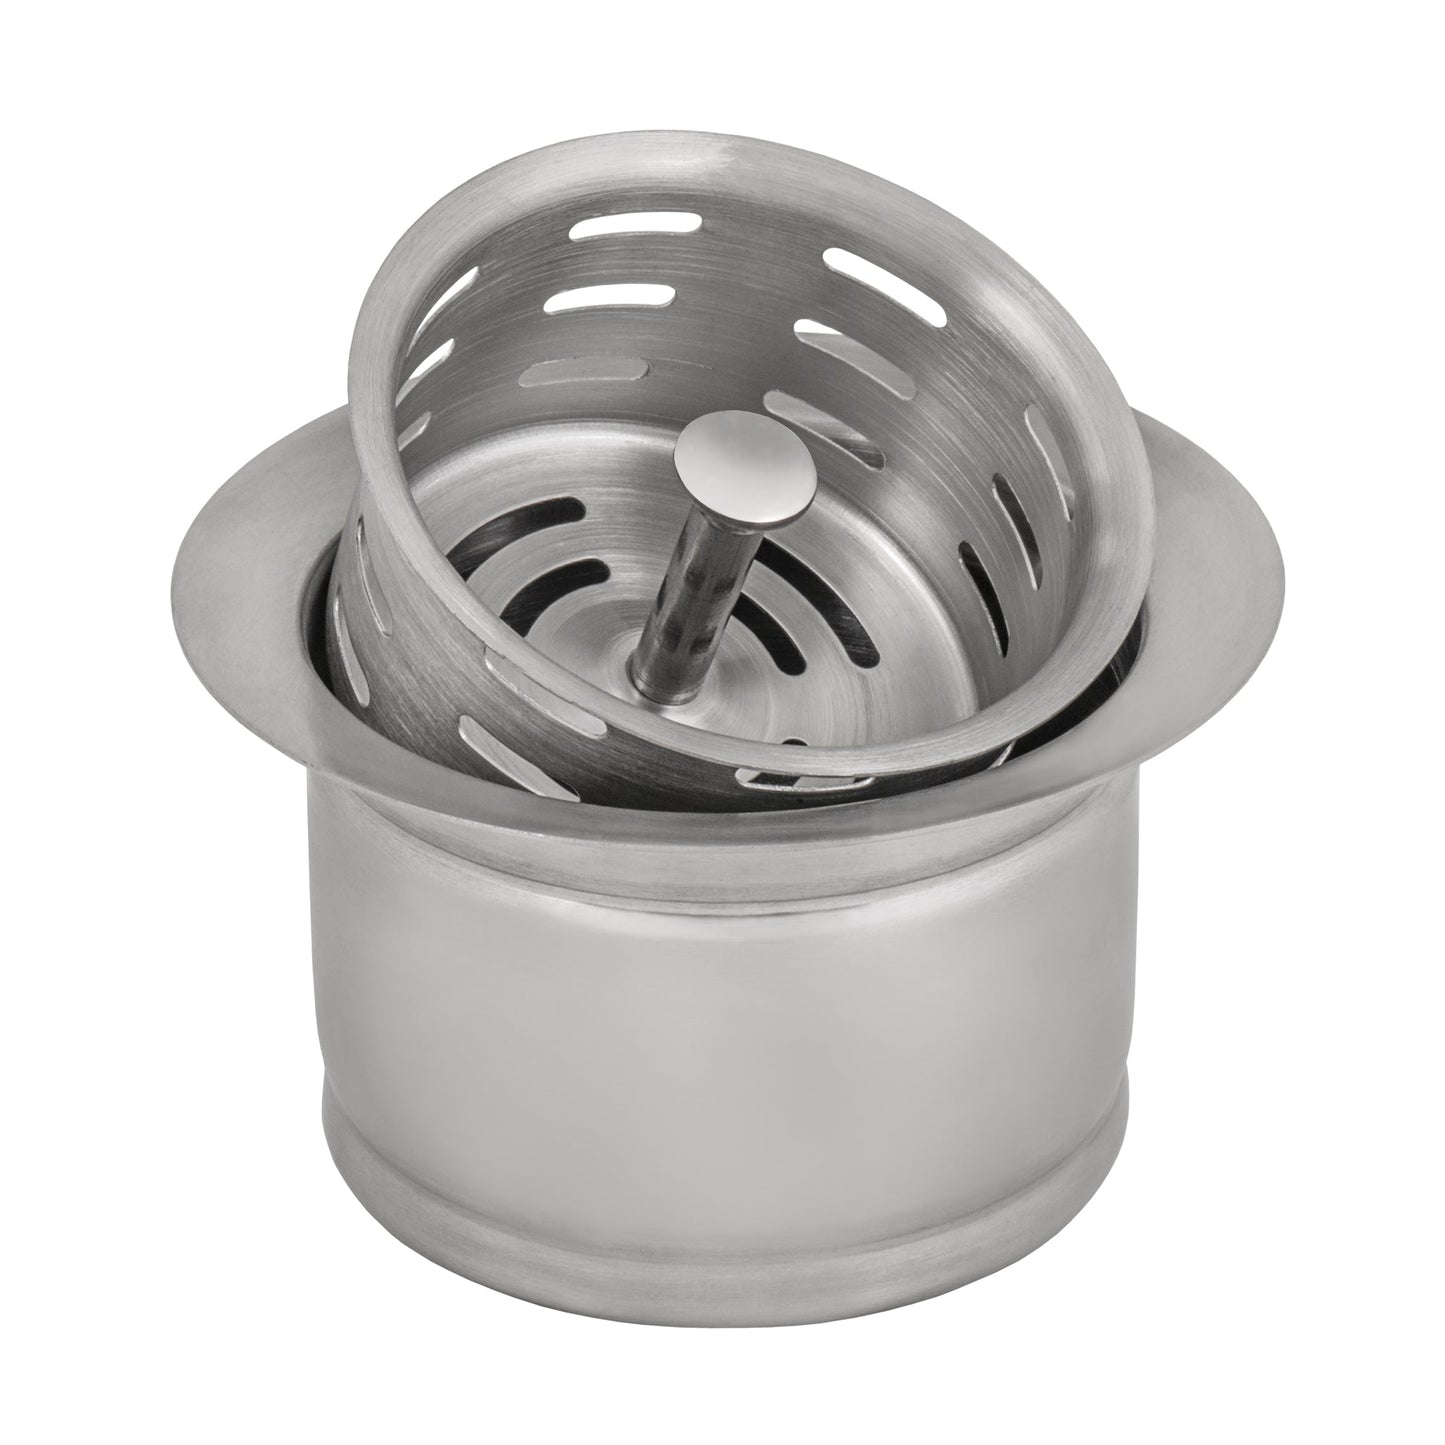 Ruvati Stainless Steel Extended Garbage Disposal Flange with Deep Basket Strainer for Kitchen Sinks